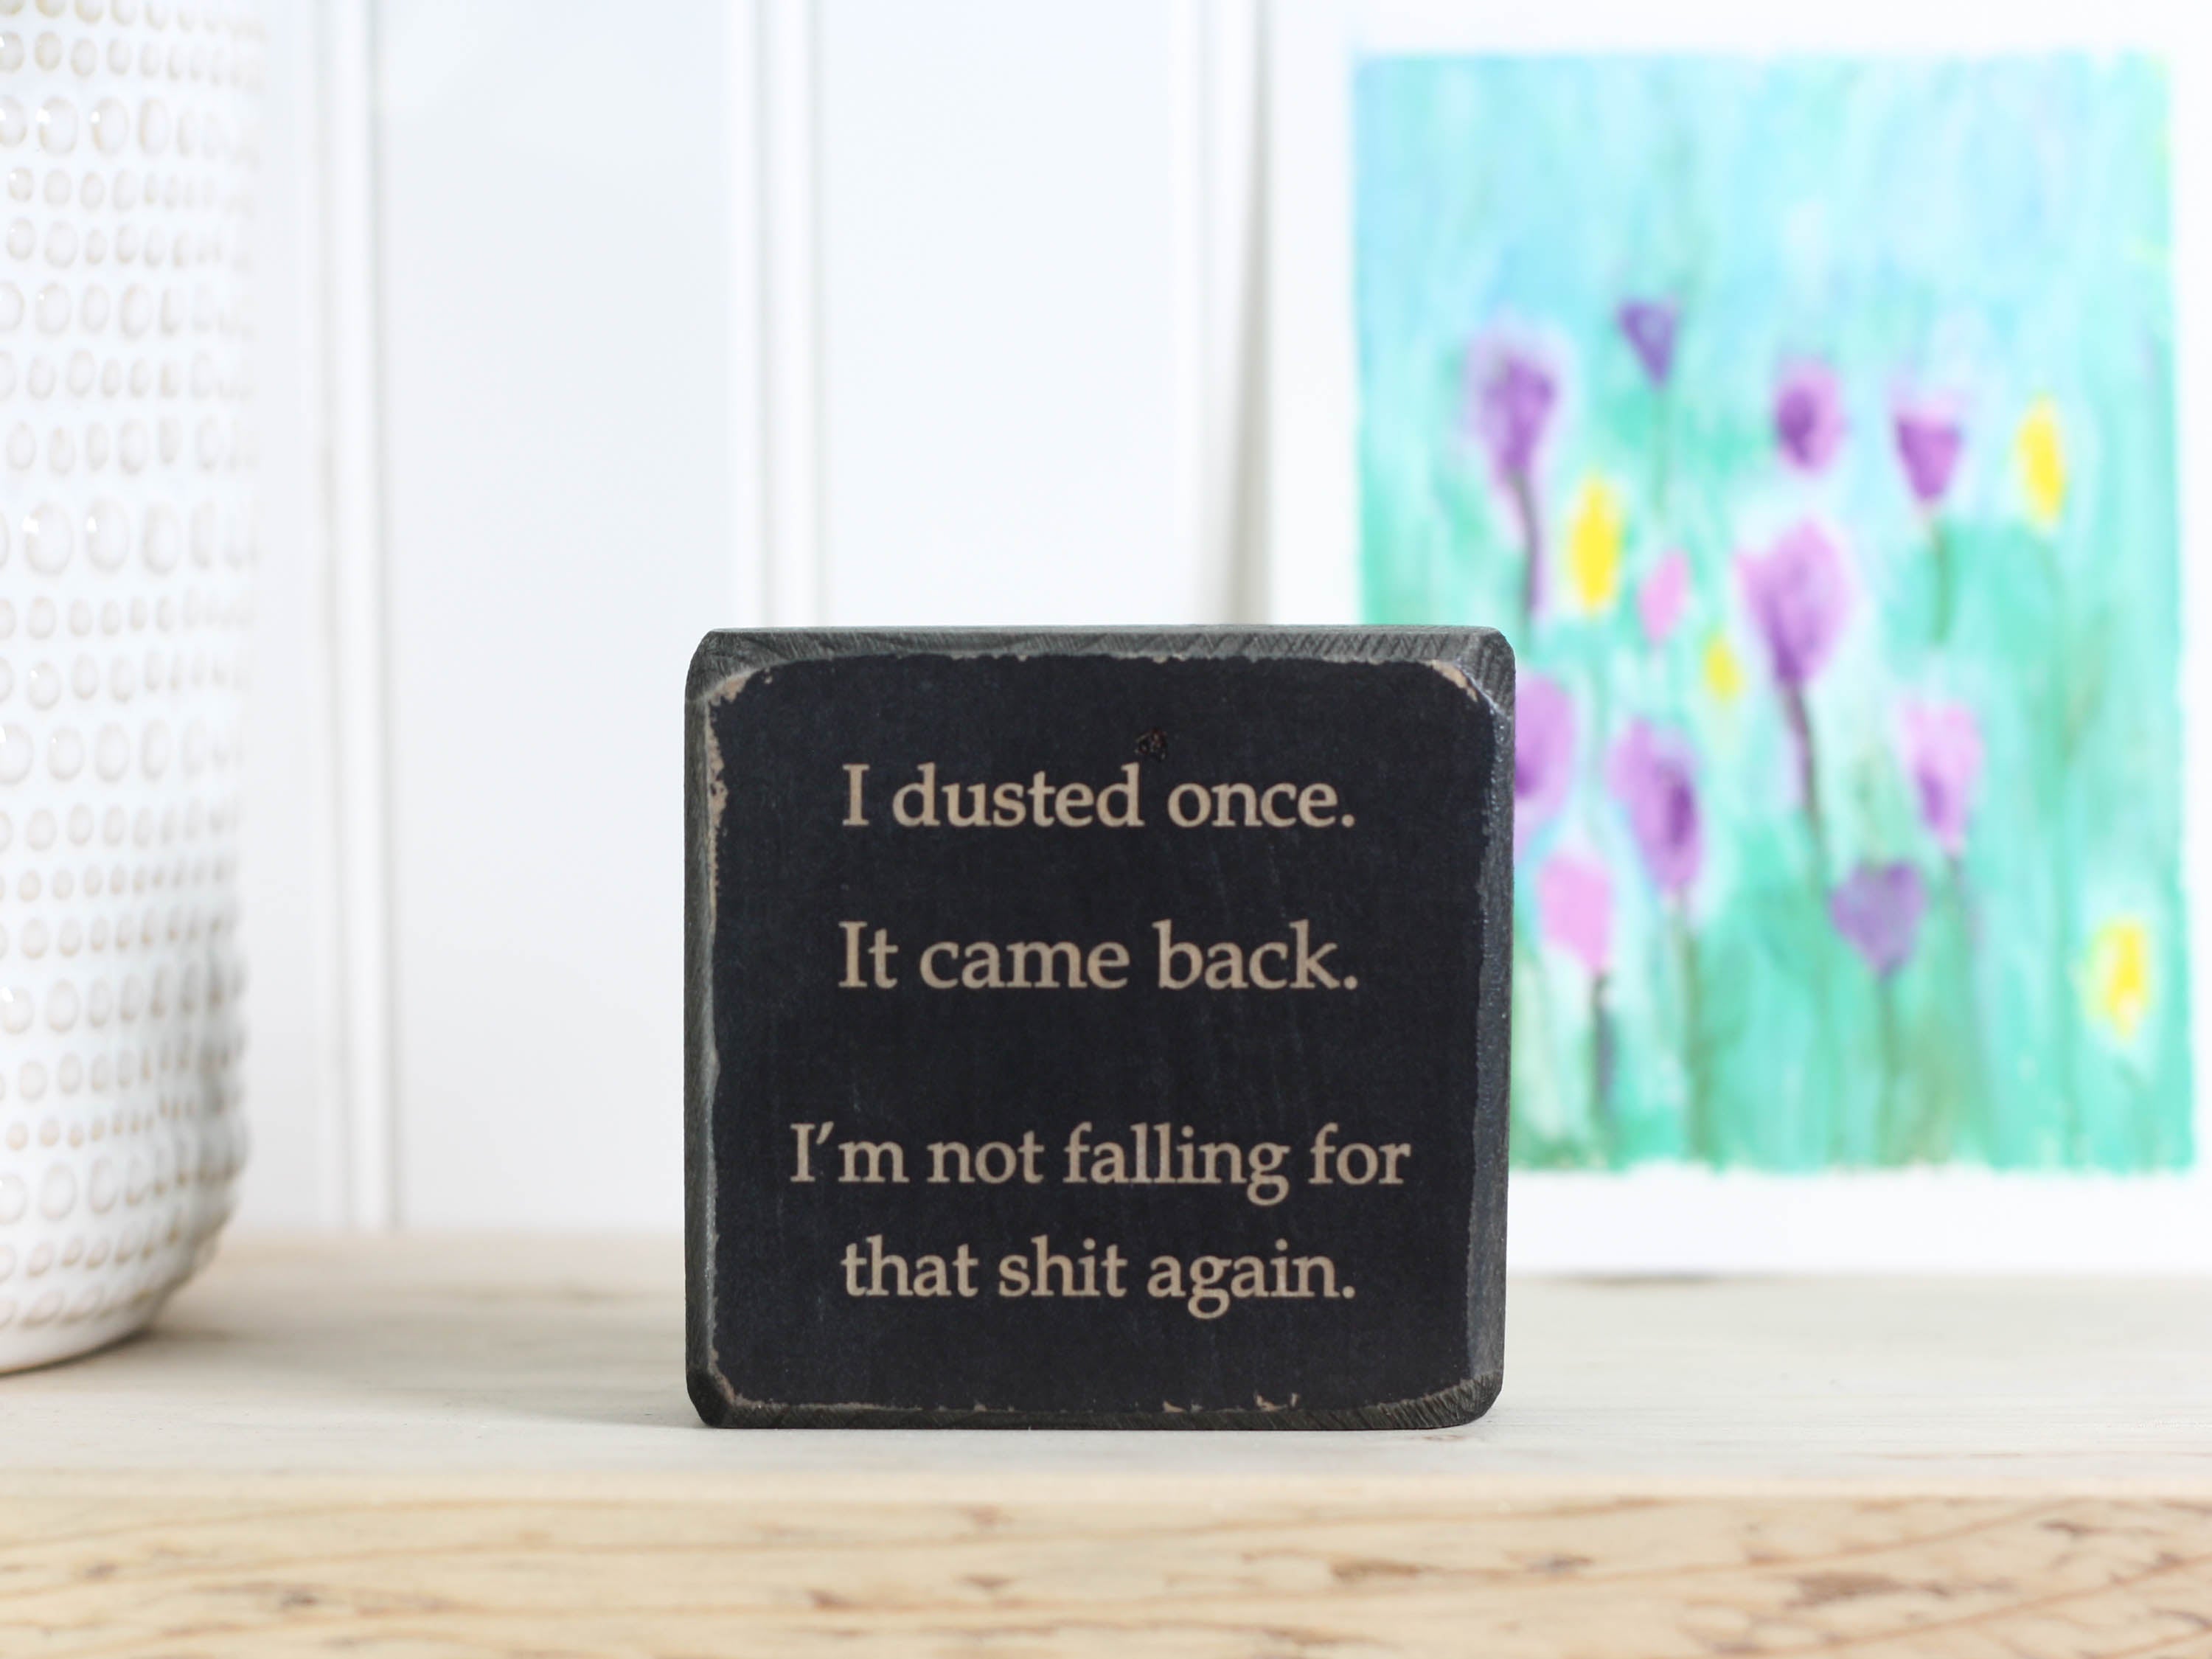 Small, freestanding, distressed black, solid wood sign with a funny saying on it "I dusted once. It came back. I'm not falling for that shit again."